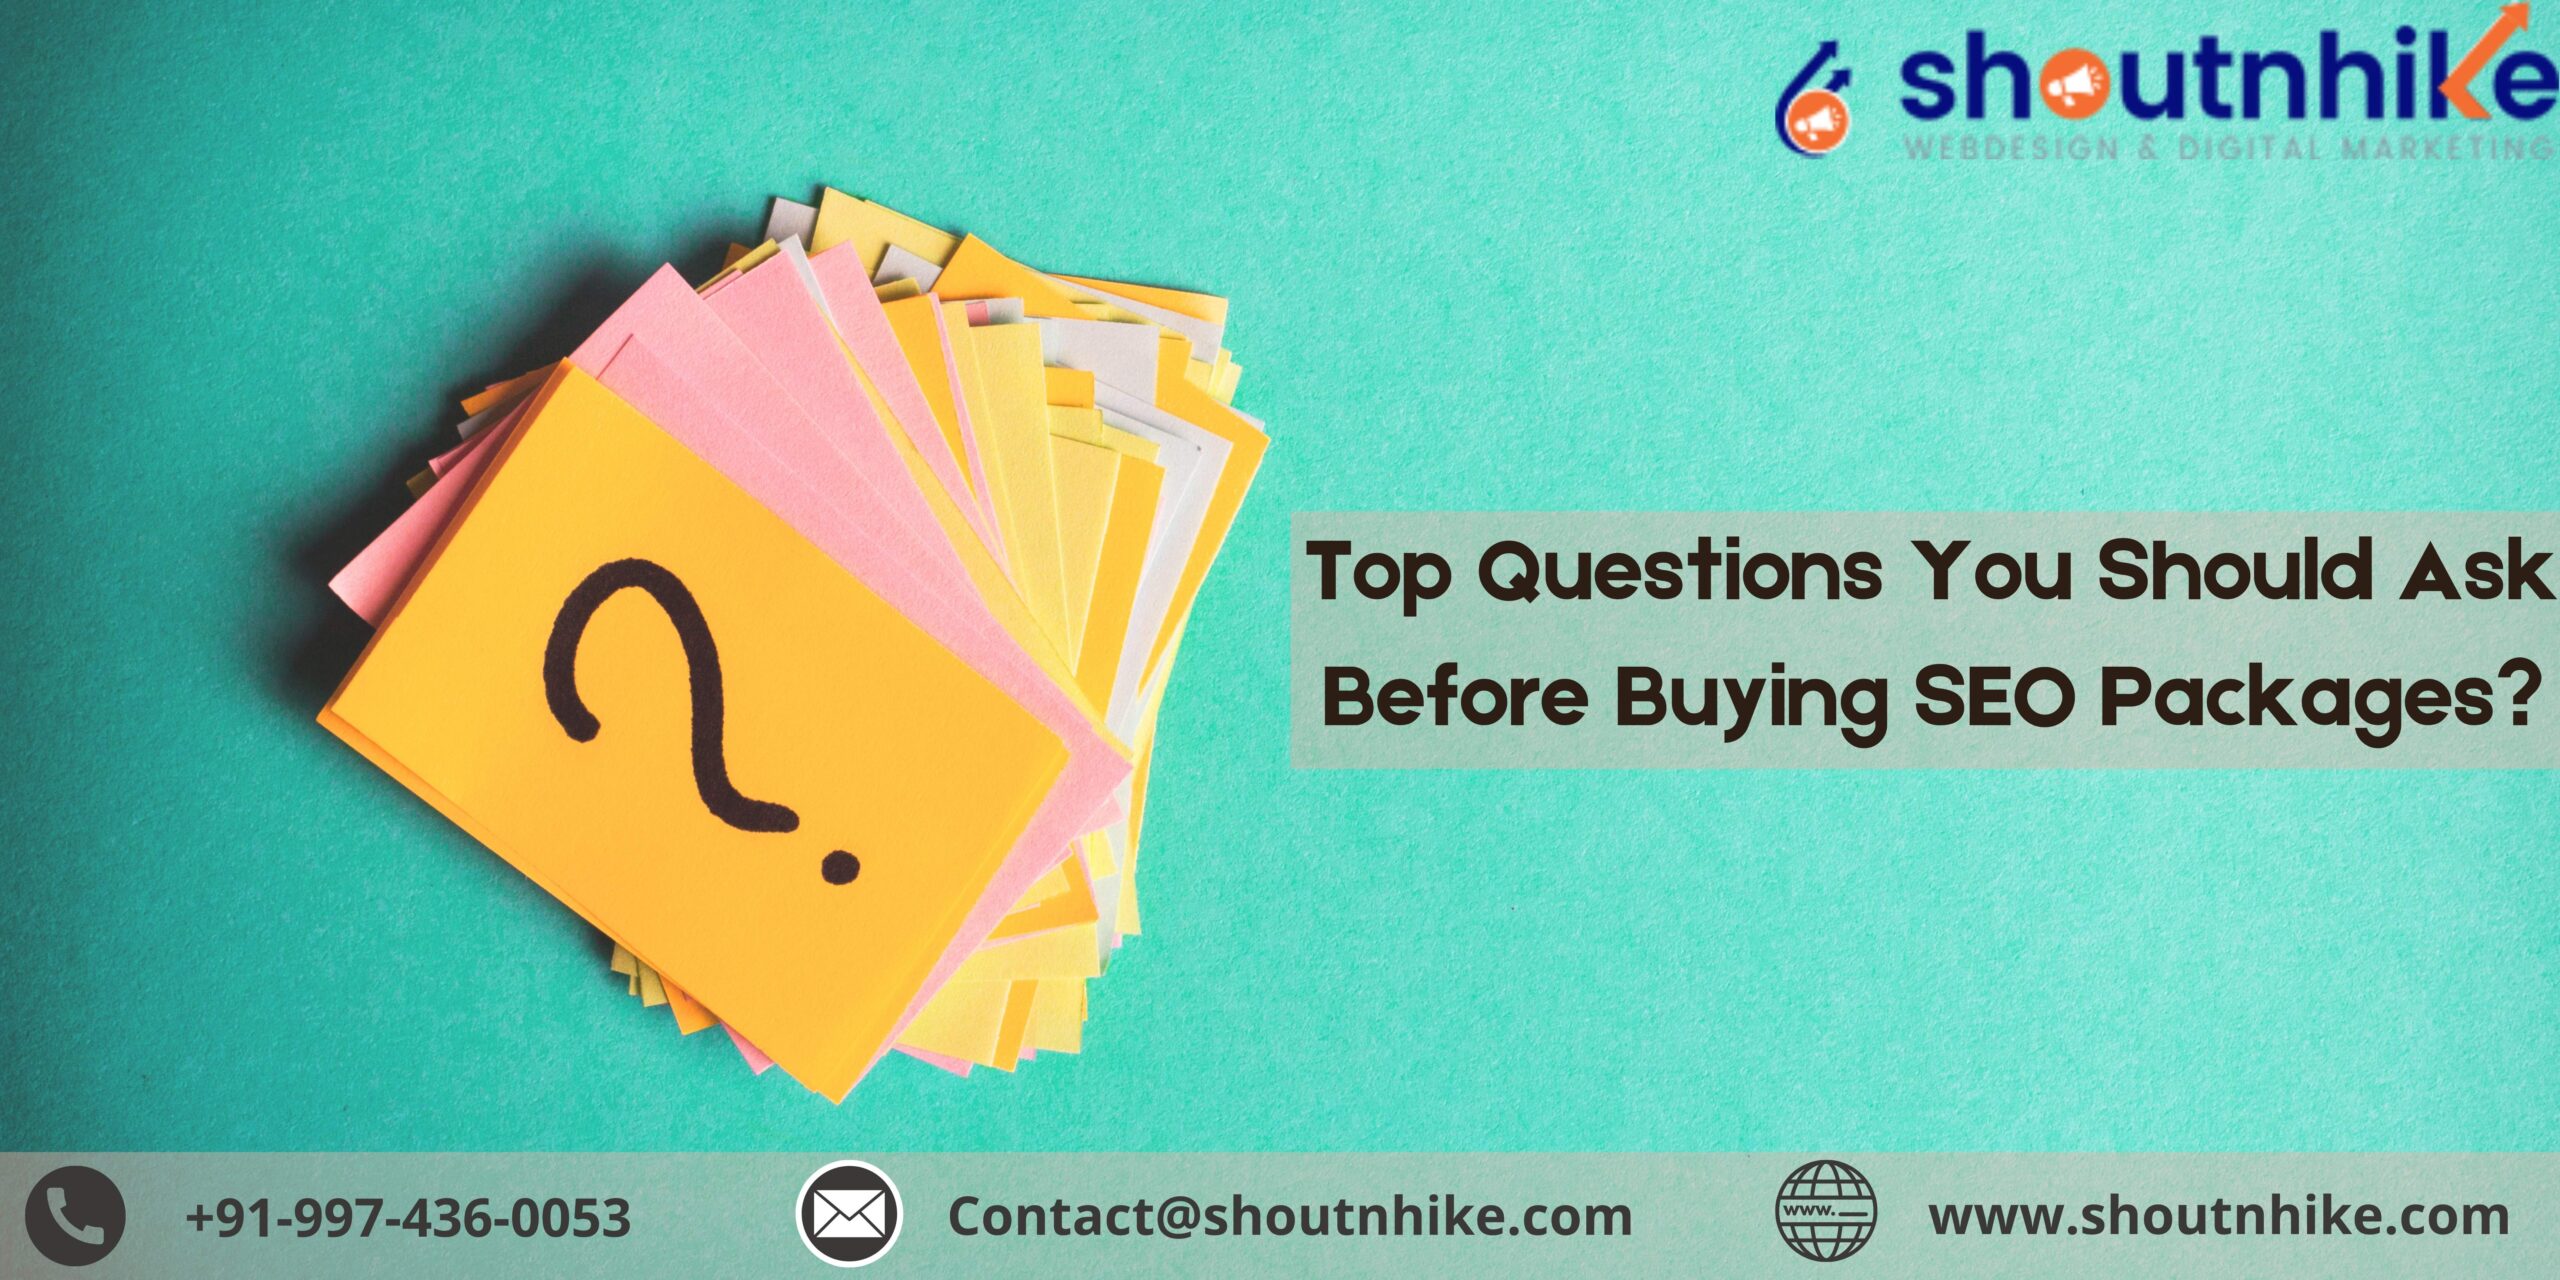 Top Questions You Should Ask Before Buying SEO Packages?